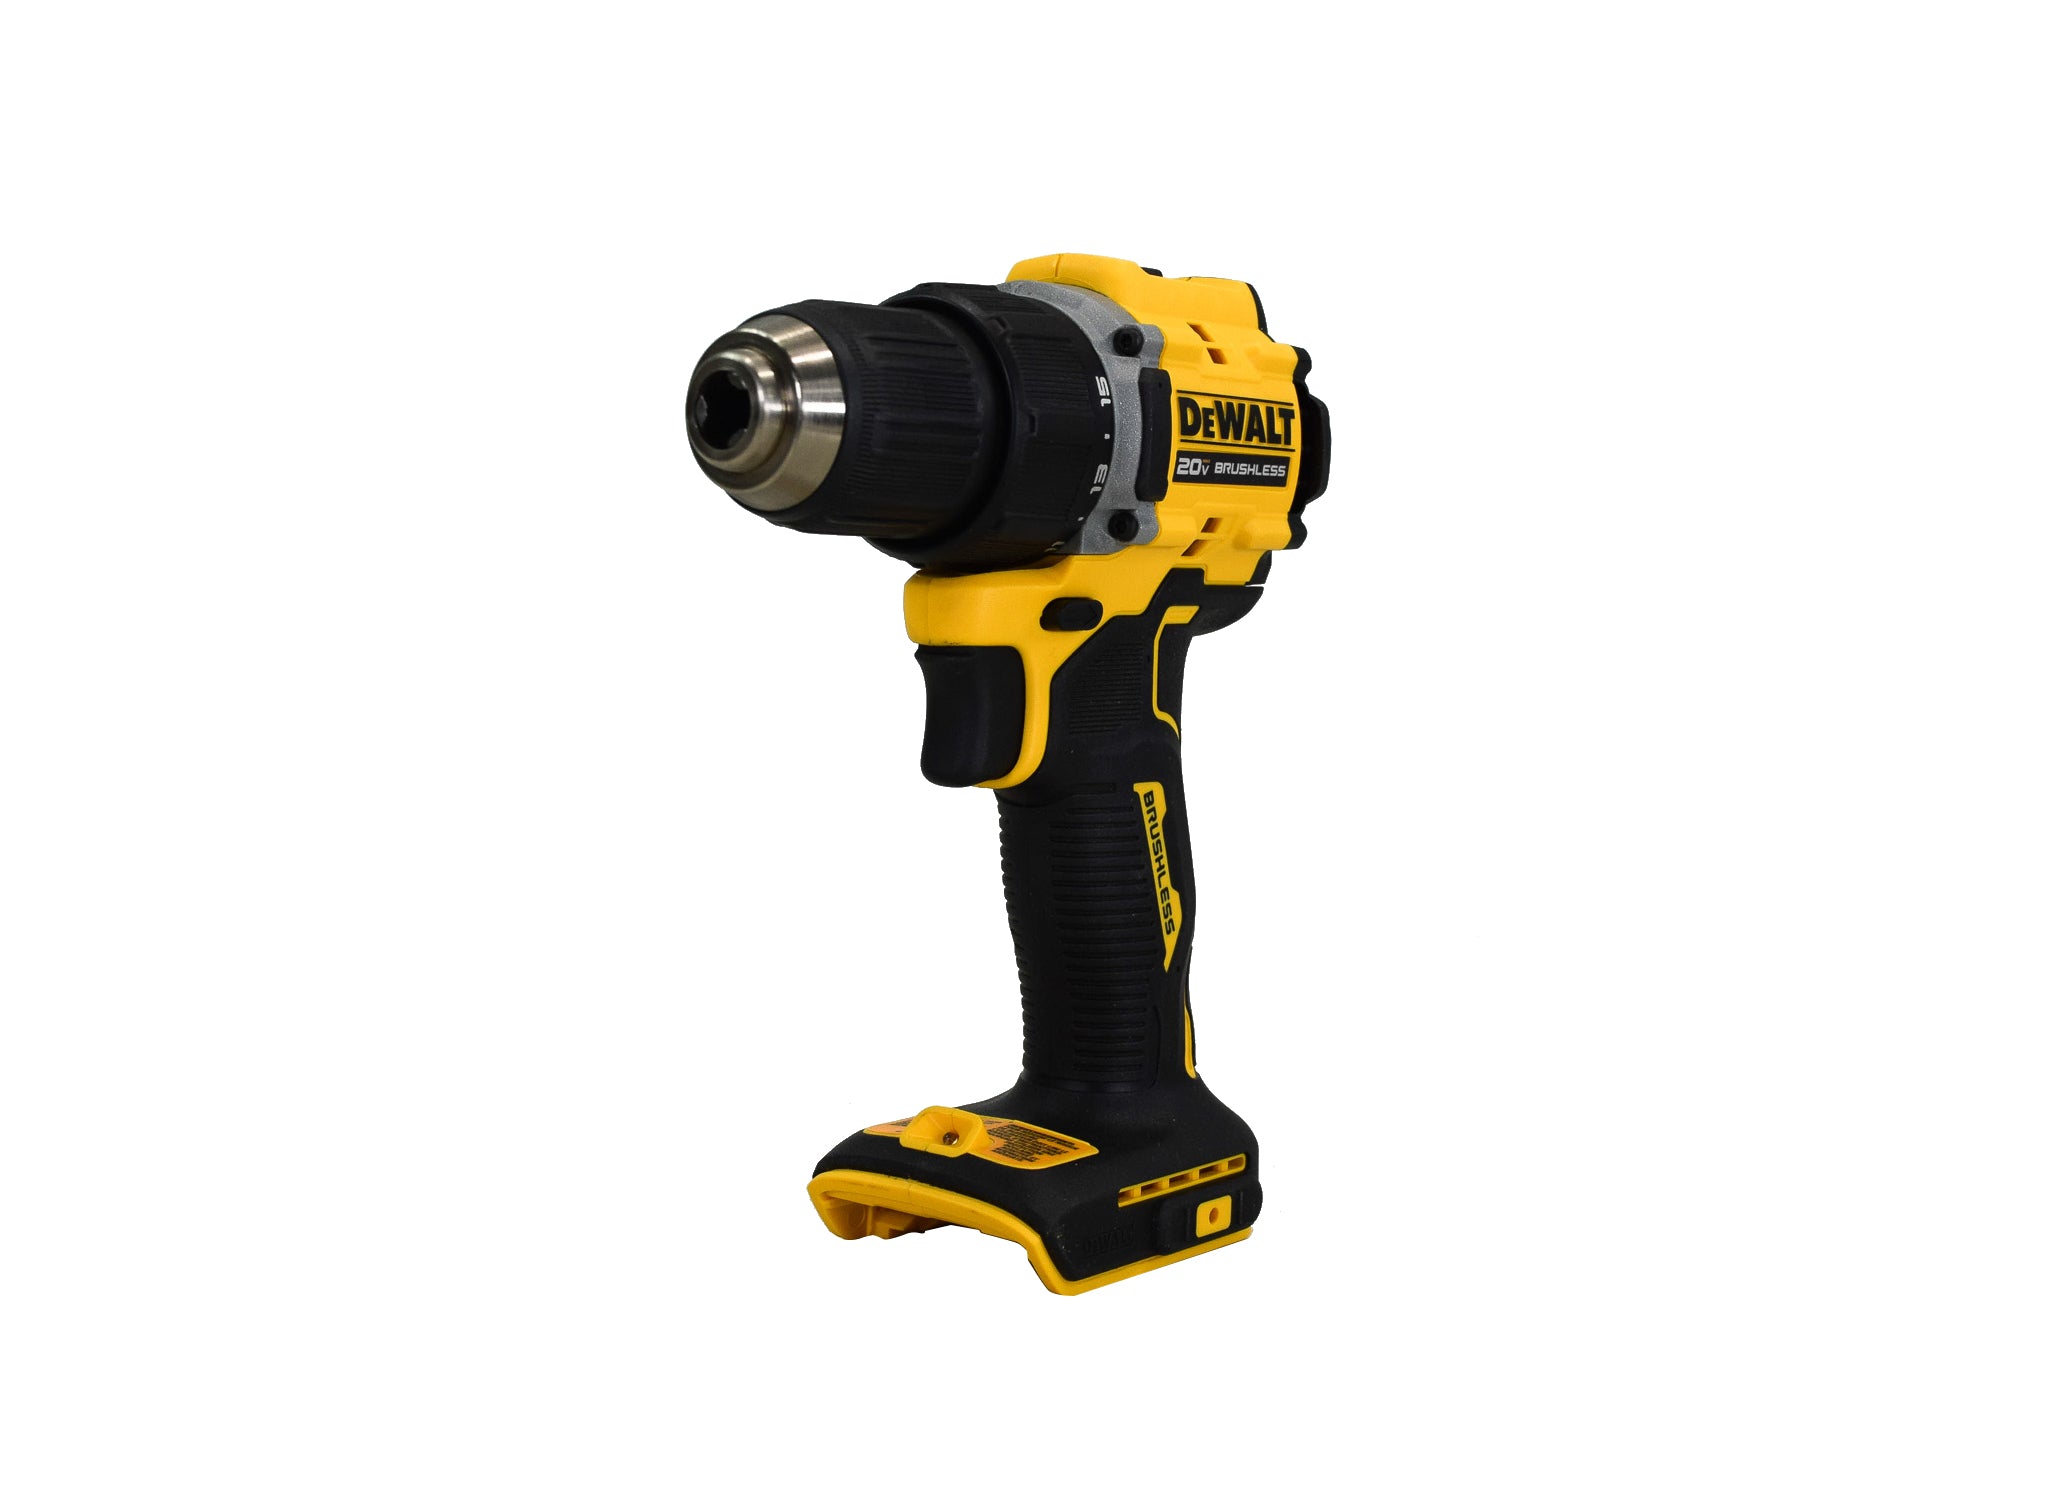 DeWalt DCD794B ATOMIC COMPACT SERIES 20V MAX* Brushless Cordless 1/2 in. Drill/Driver